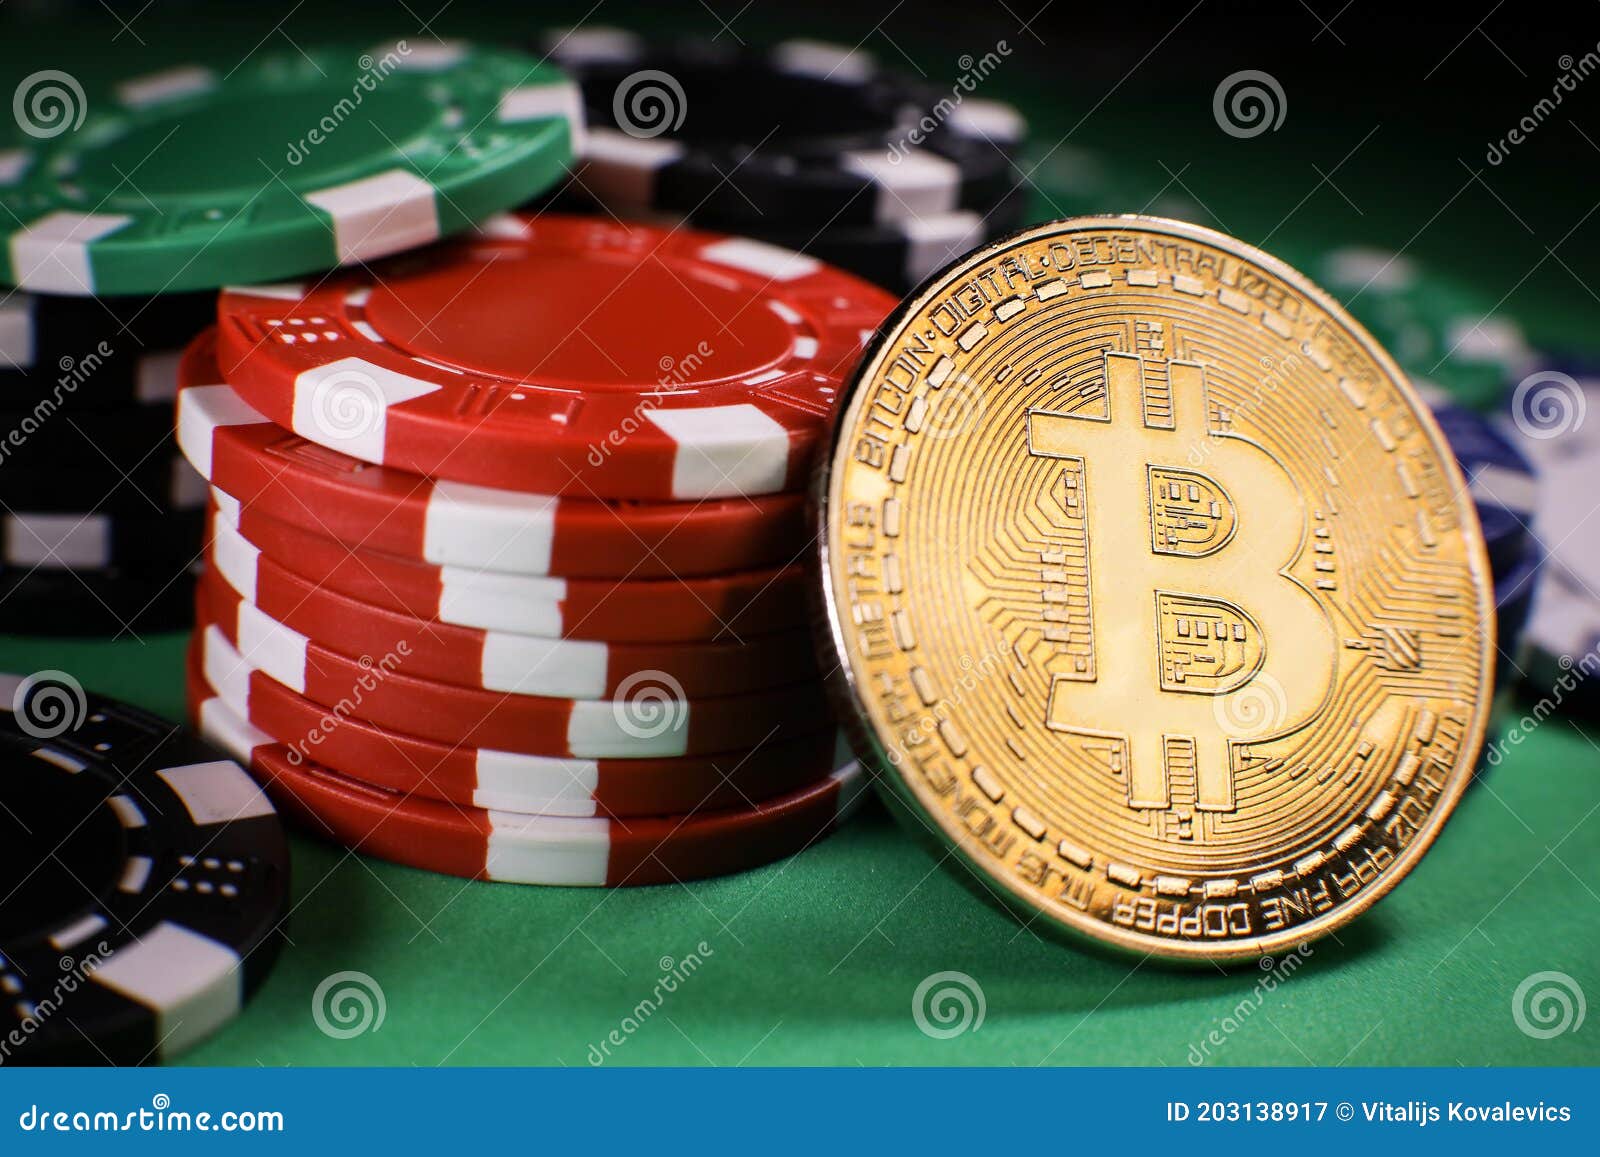 When online casino crypto Grow Too Quickly, This Is What Happens